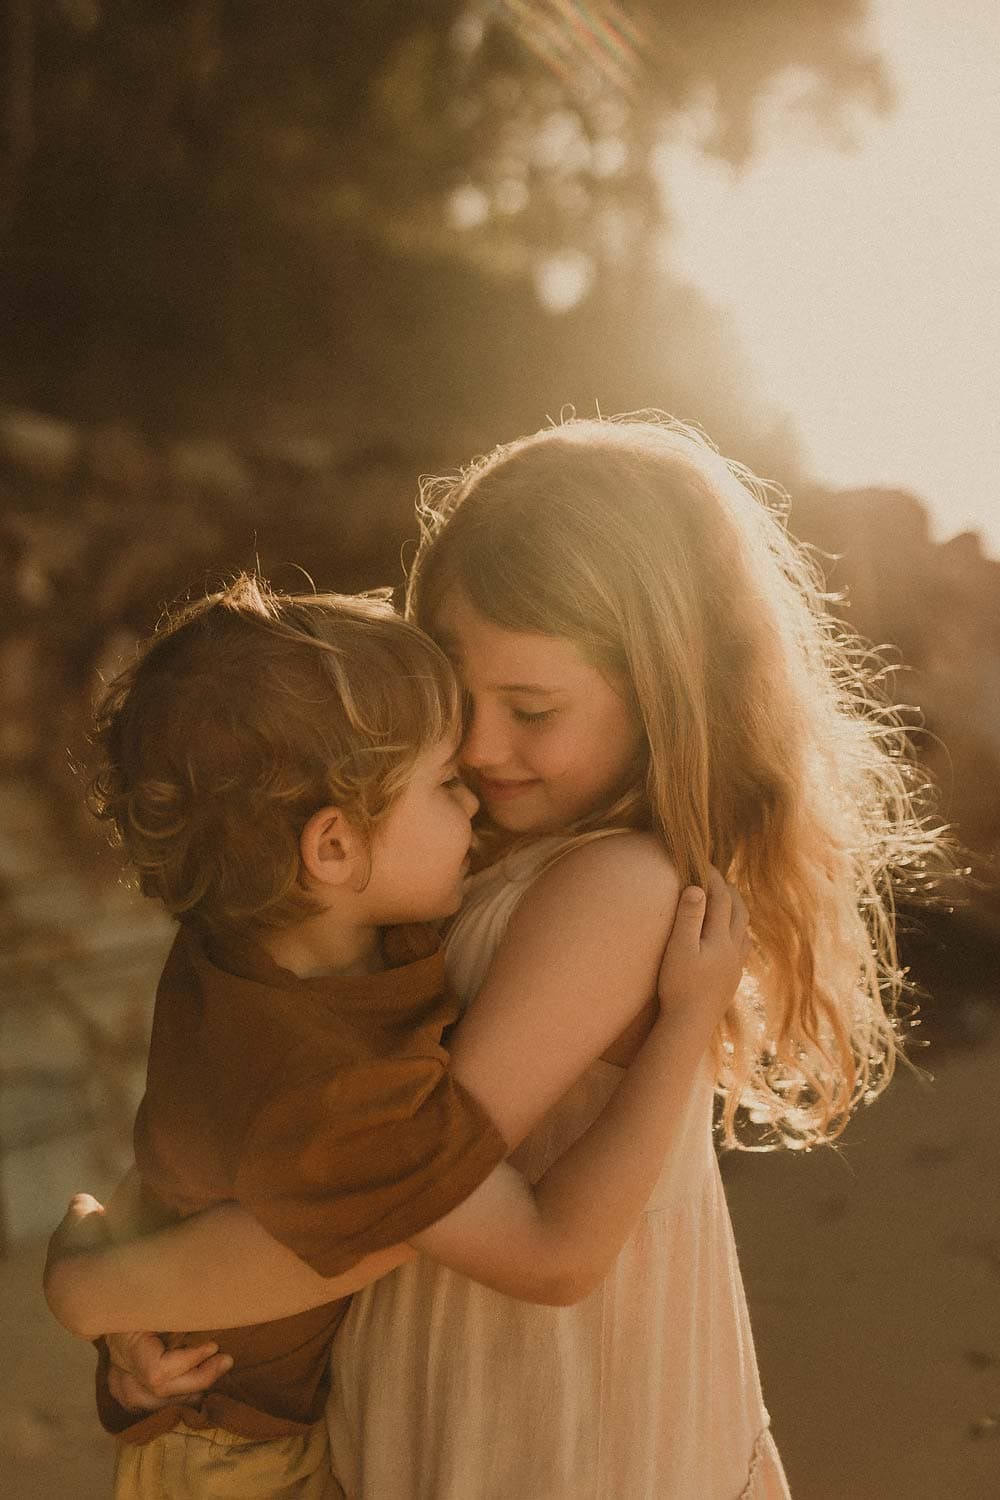 Family-photography-sydney-little-boy-and-girl-embrace-sweetly-and-share-moment-with-little-girl-carrying-little-boy-and-little-boy-leaning-into-his-sister-whilst-the-sunlight-illuminates-her-hair-casting-golden-colours